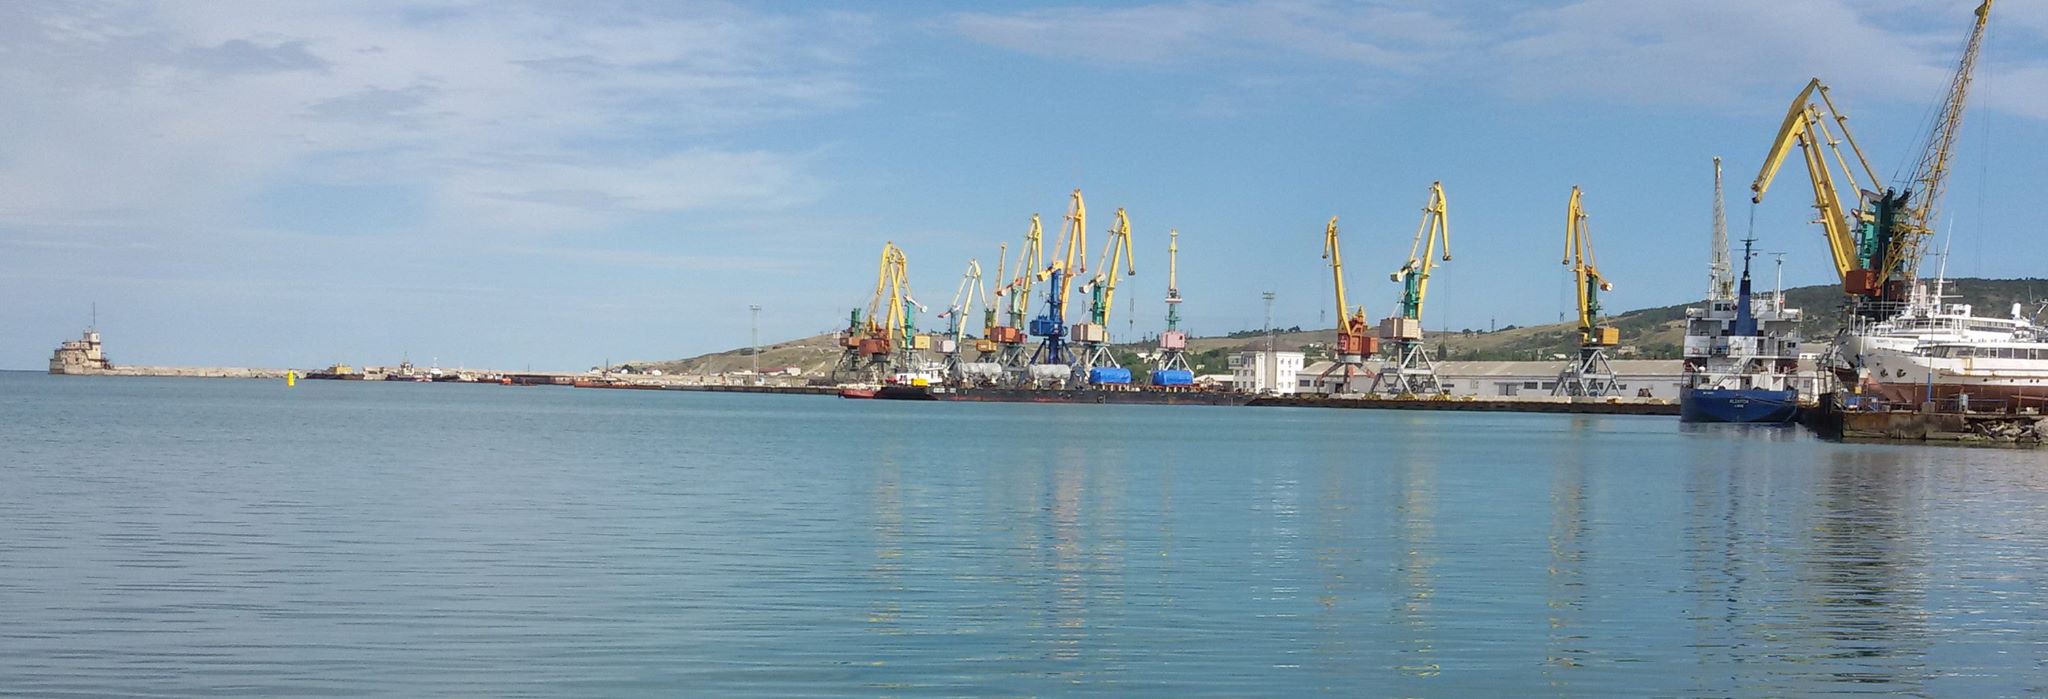 Two more Siemens turbines delivered to occupied Crimea by same company